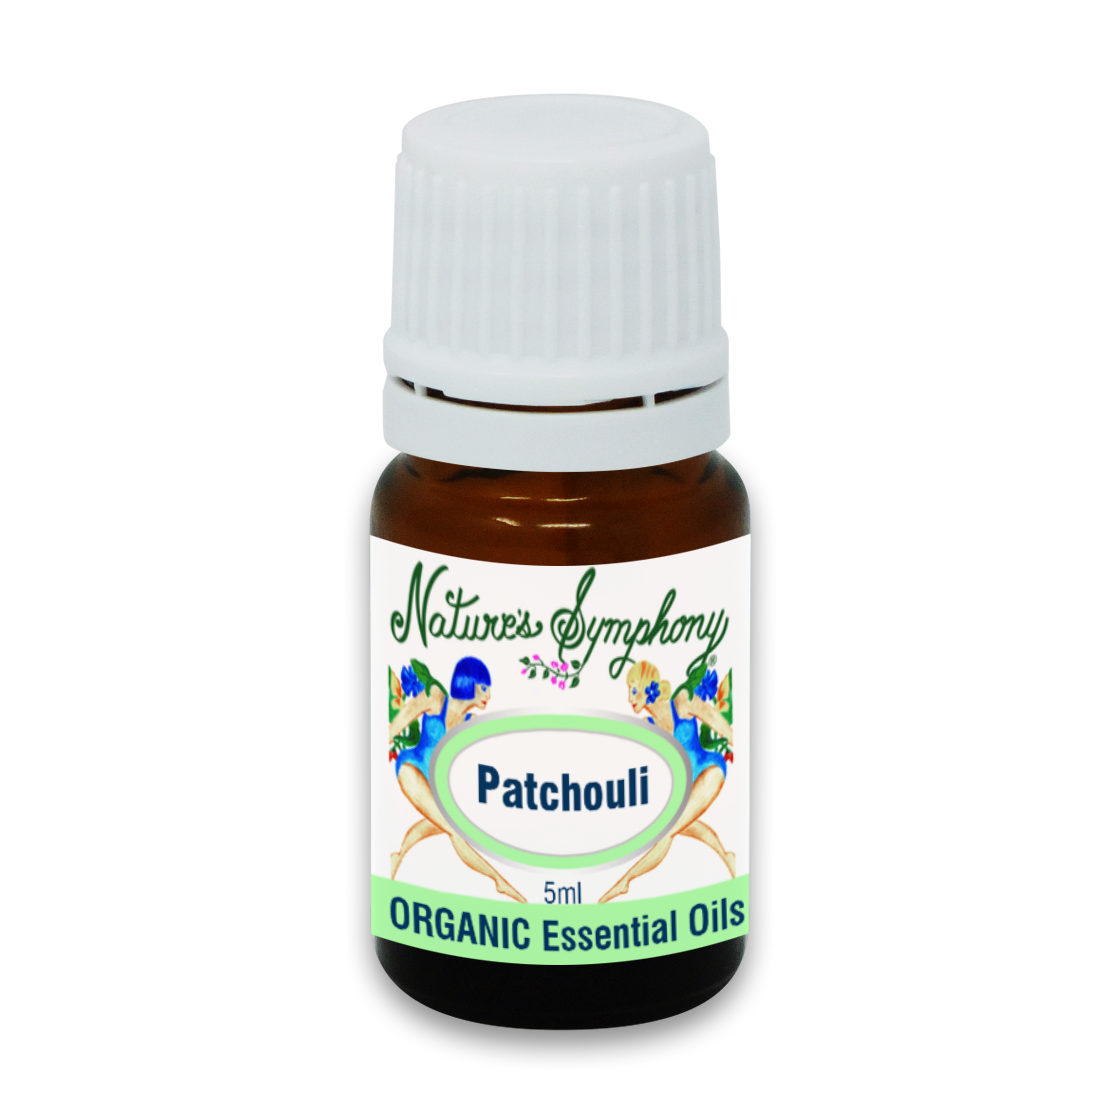 Patchouli, Organic/Wildcrafted oil - 5ml